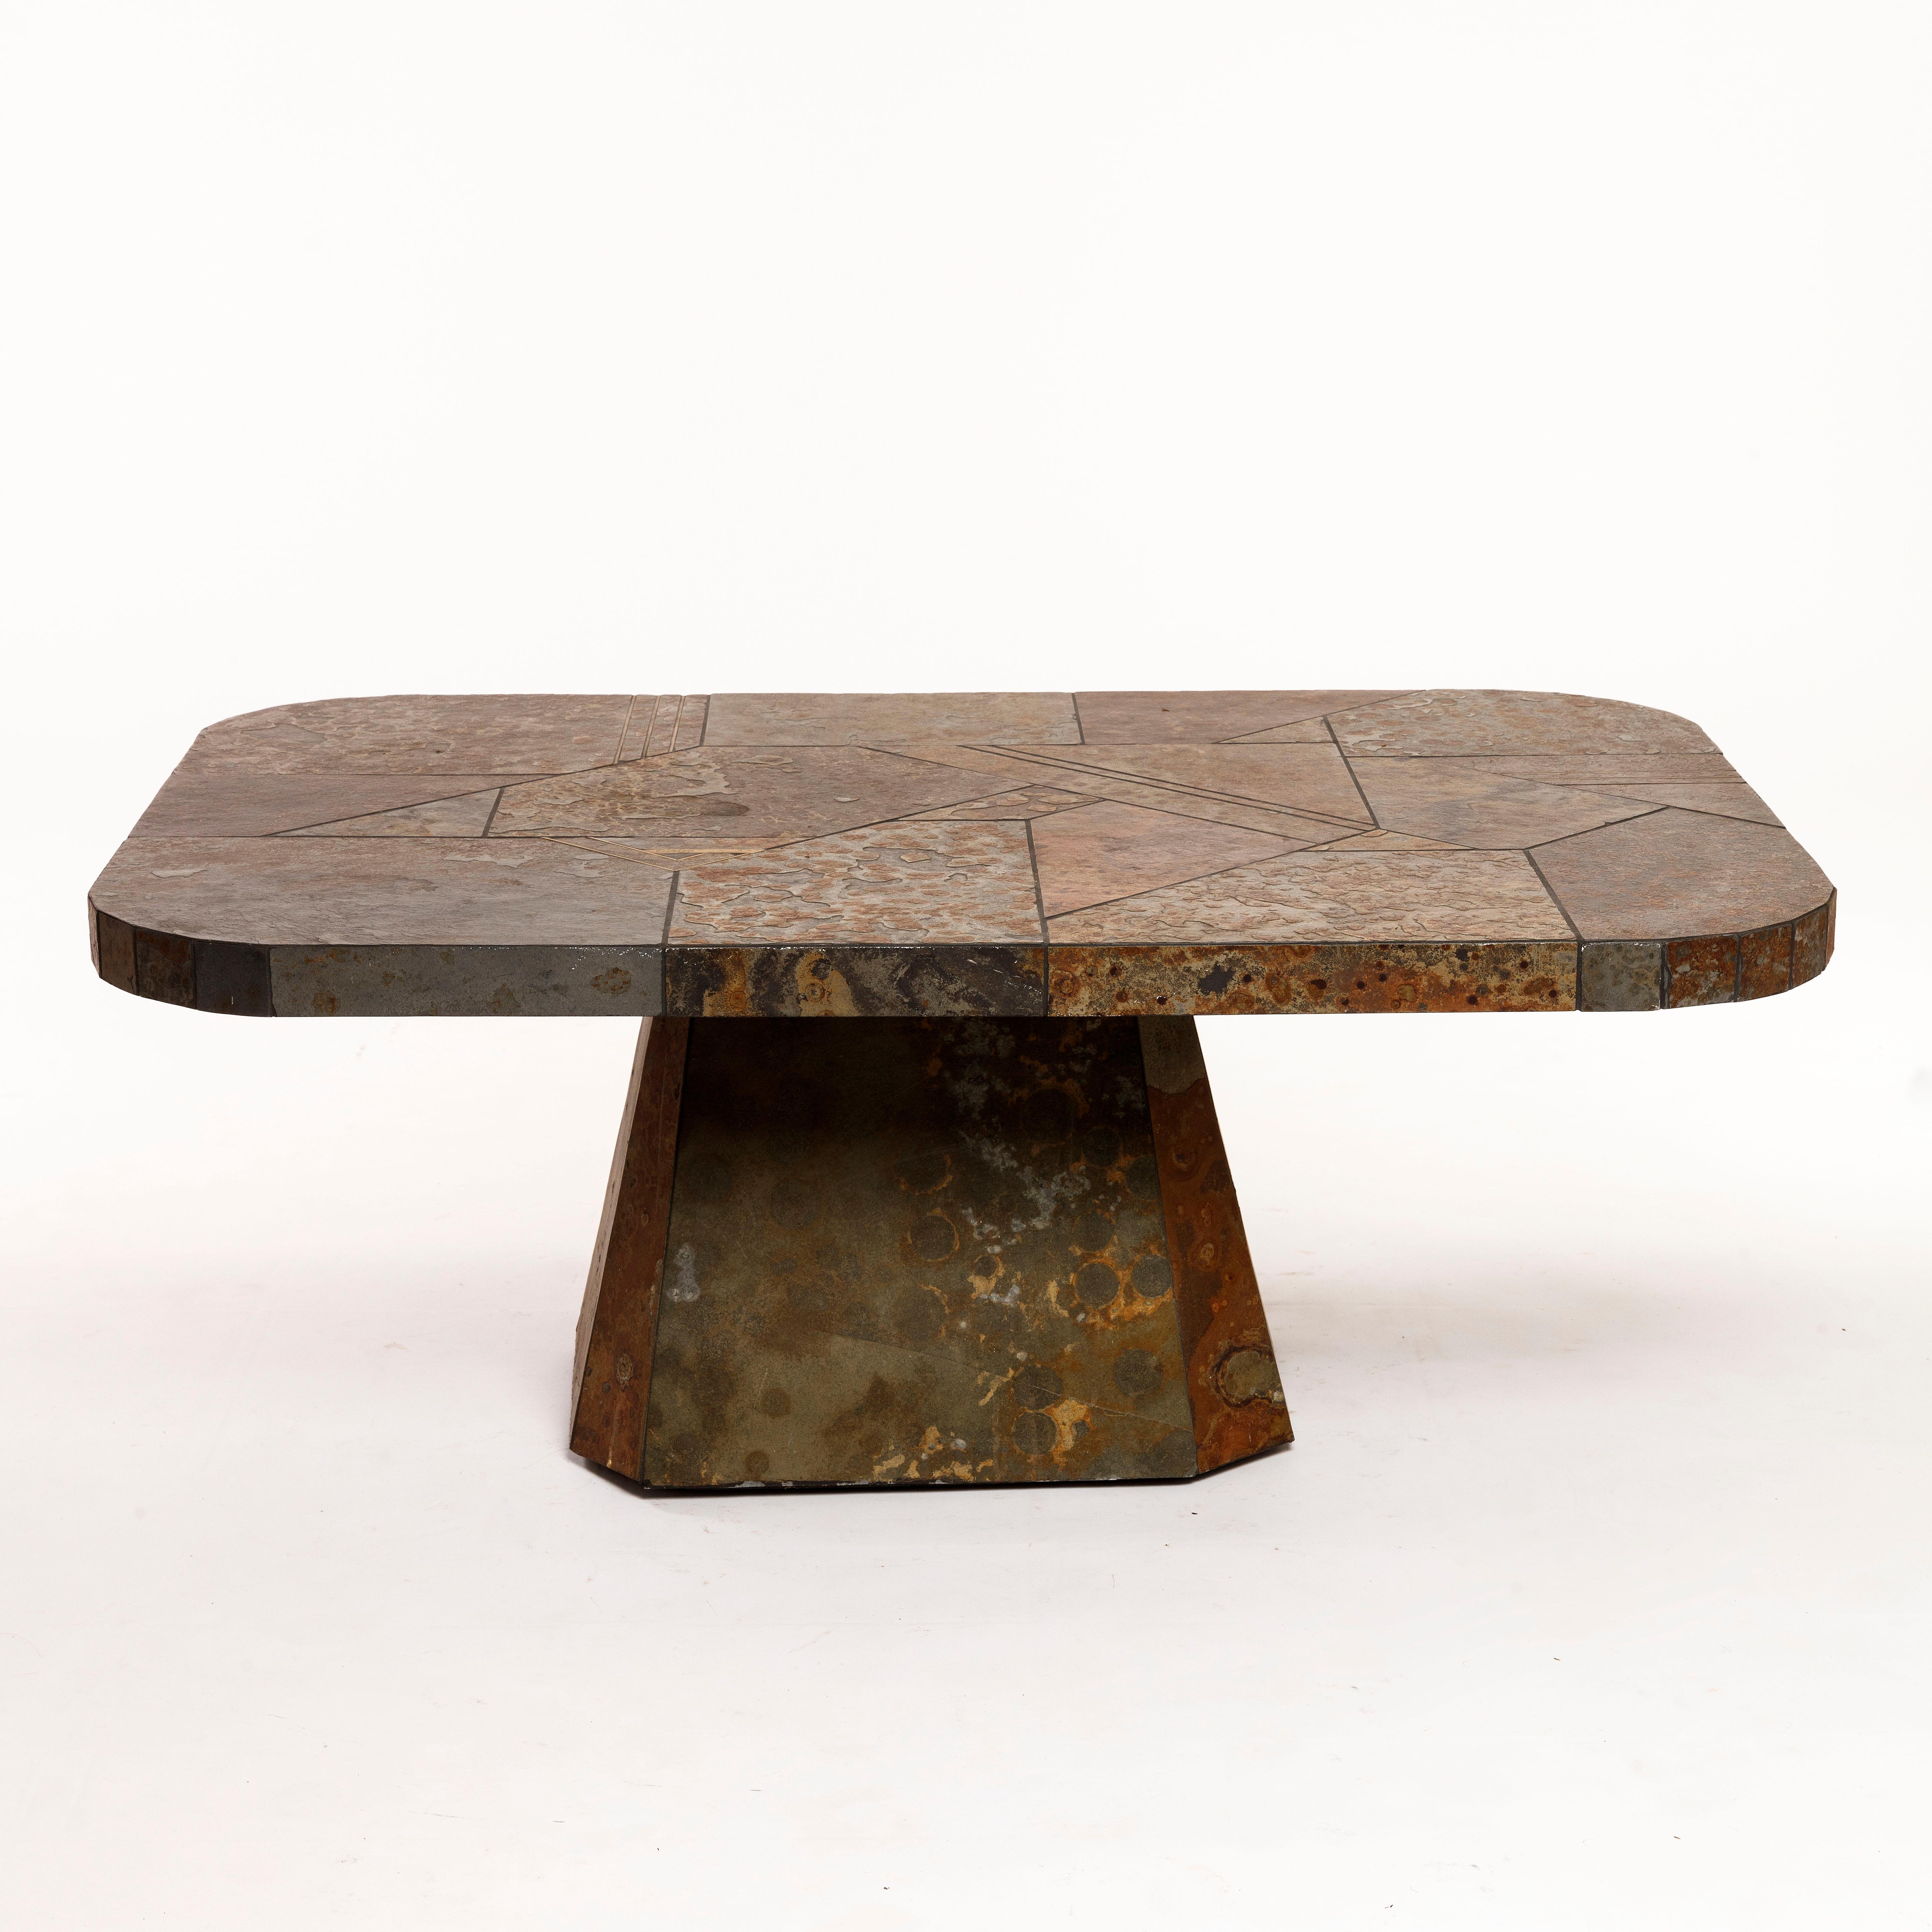 Rectangular assembled schist table with rounded corners and brass inlay, very rare octagonal legs, signed on the top H: 47 cm Top: 80 x 120 cm. 

Paul KINGMA (1931 - 2013)
Dutch sculptor and mosaist Paul Kingma (1931-2013) lived and worked in The